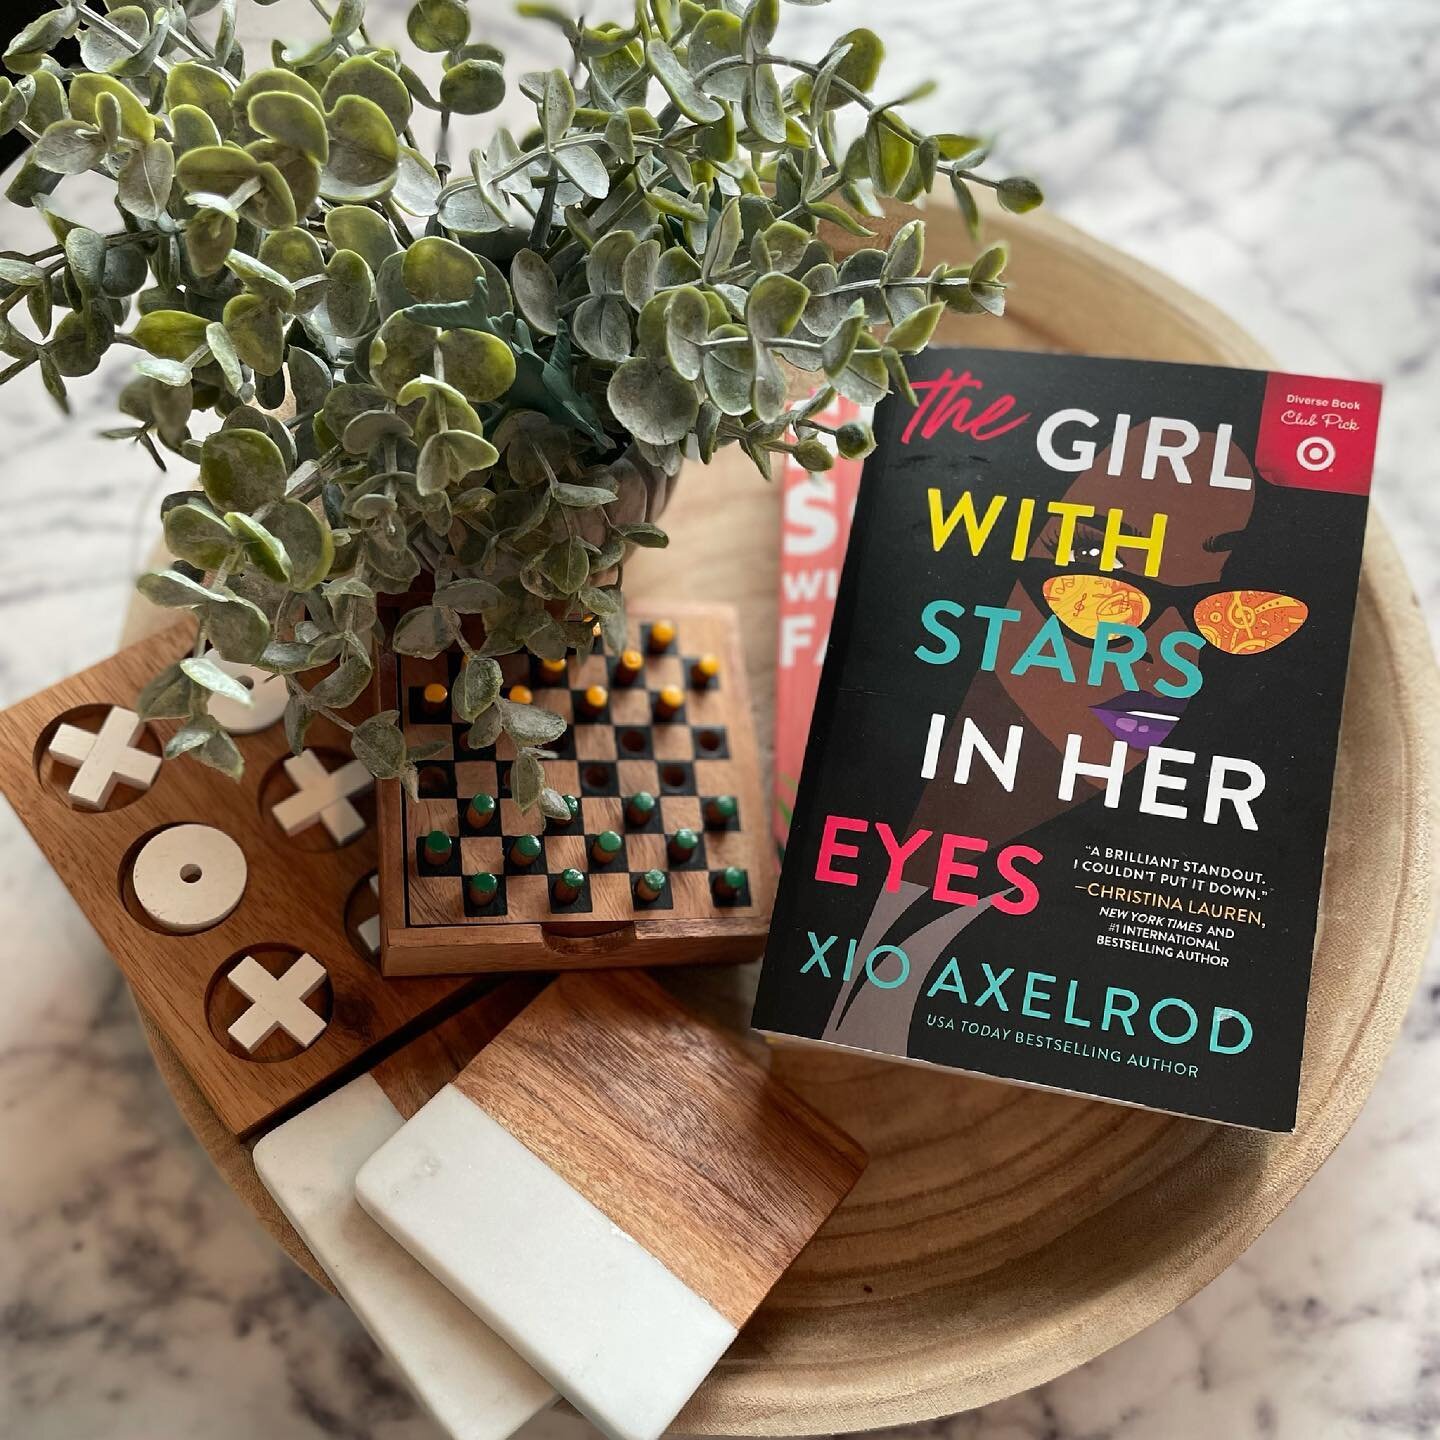 We&rsquo;re going on a little road trip for the 4th and I can&rsquo;t wait to start reading The Girl With Stars In Her Eyes by @xioaxelrod!!! The cover is beyond beautiful, but it was this line &ldquo;strong, feminist, and fierce as fire&rdquo; that 